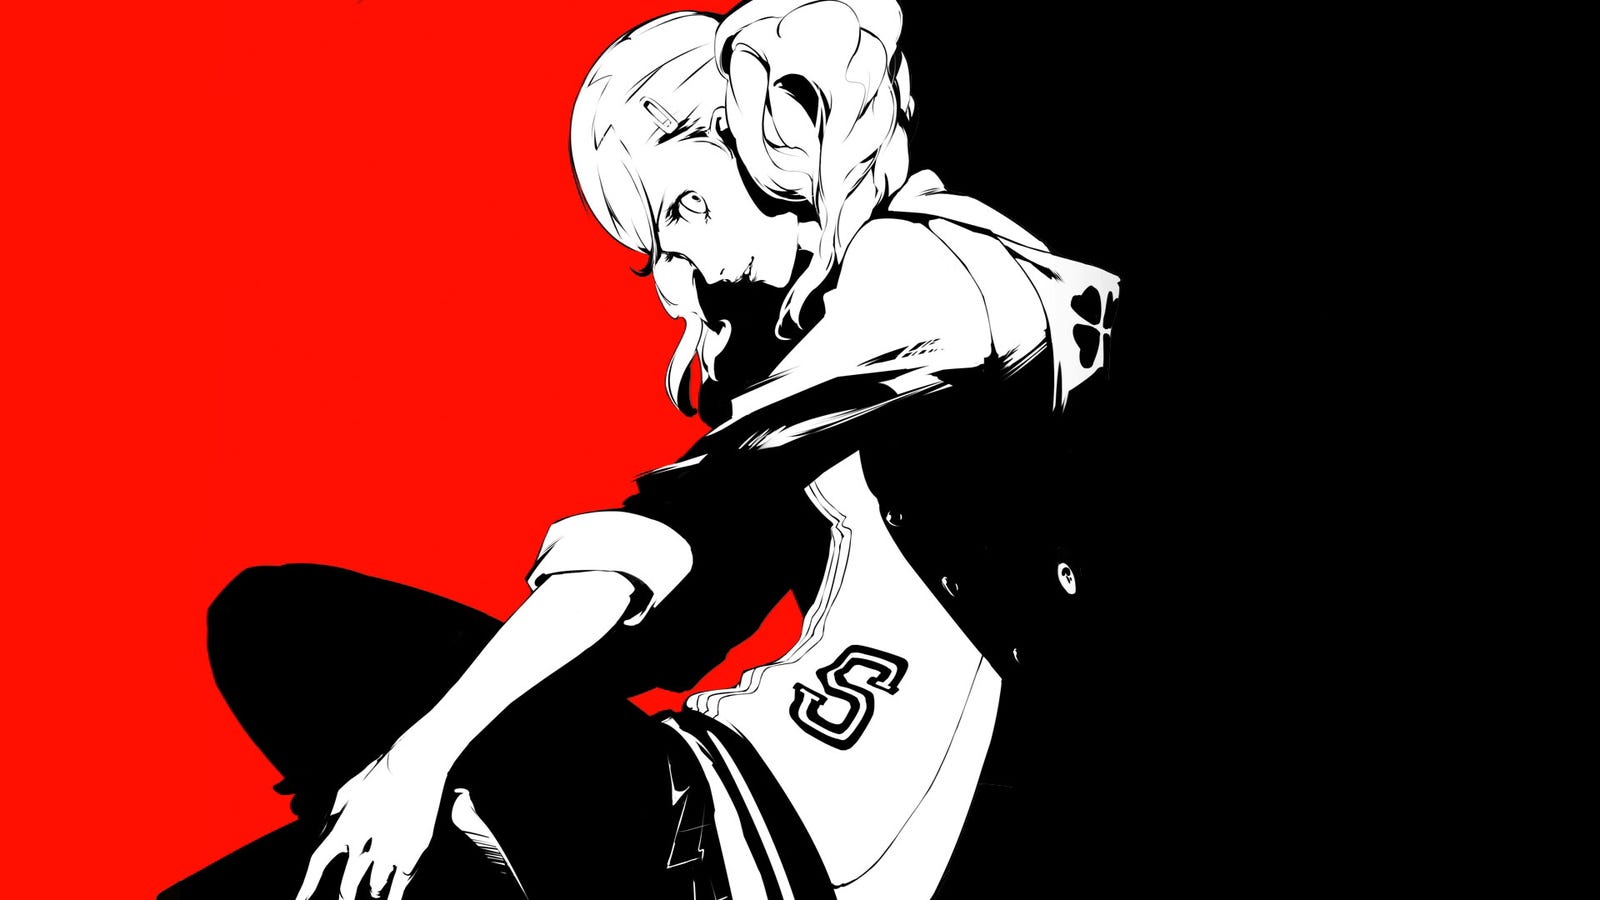 Persona 5 Is My Game Of The Year